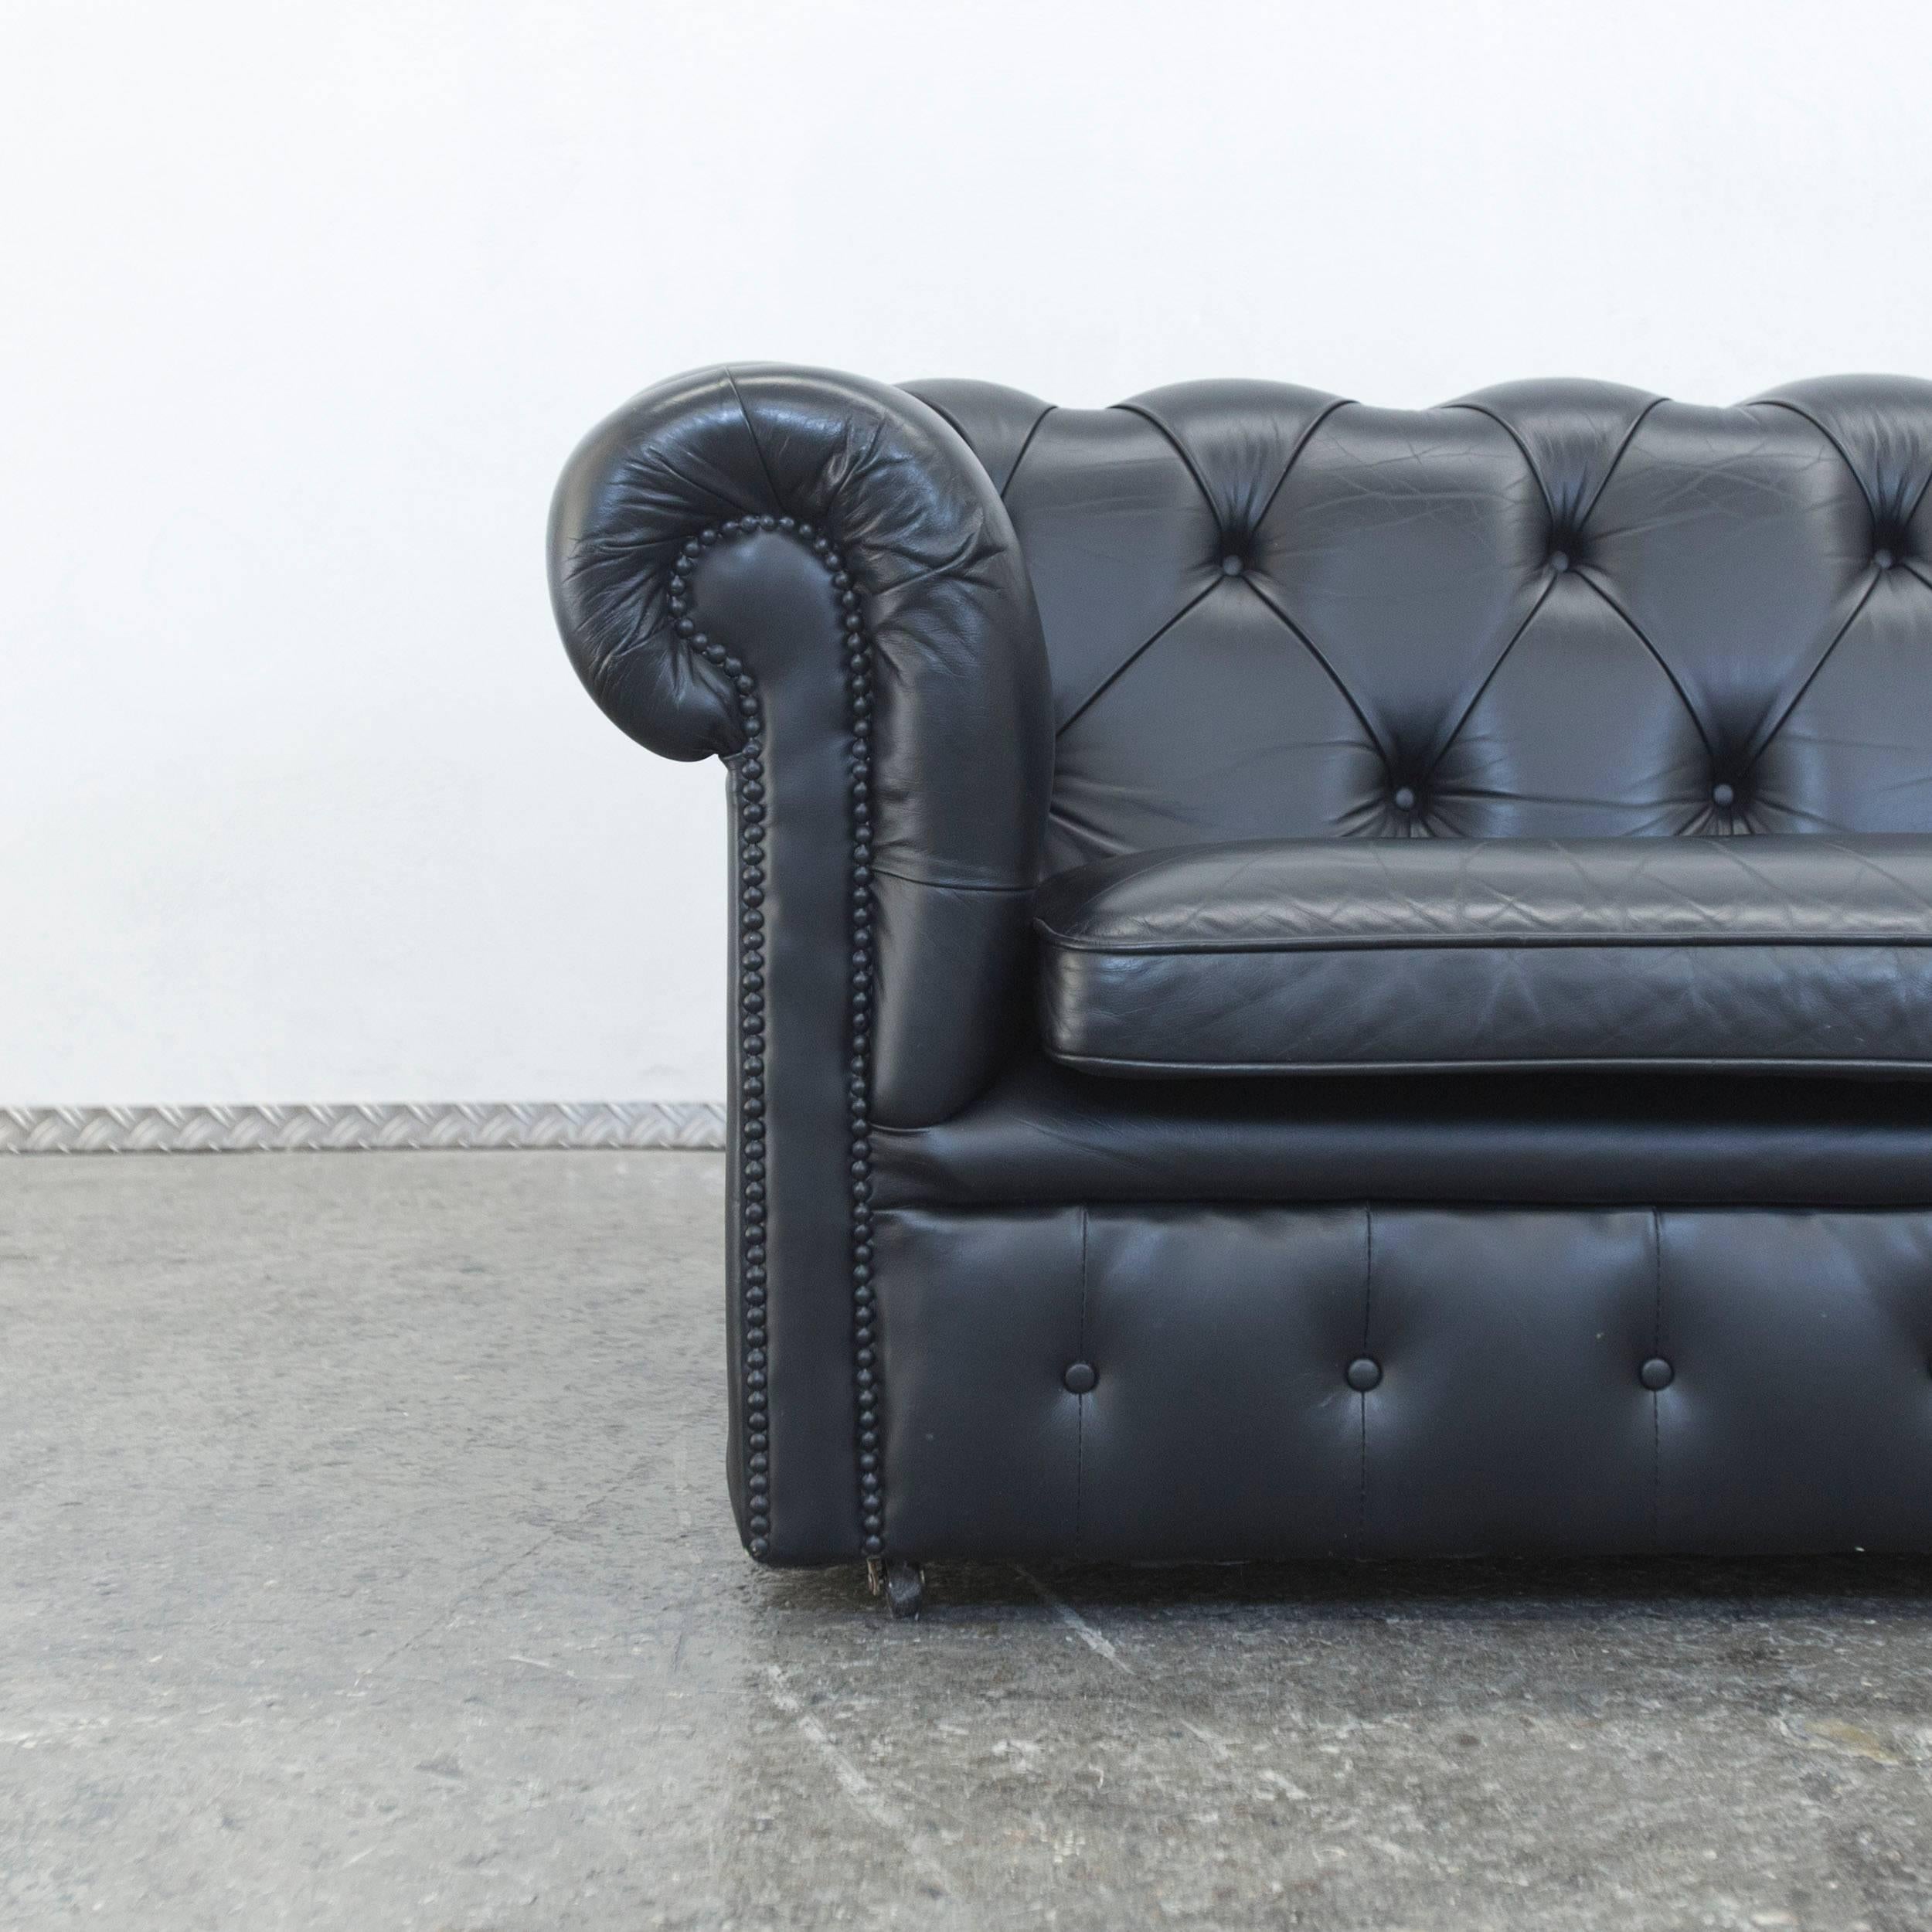 Black colored Springvale Chesterfield leather sofa in a vintage style, designed for pure elegance and comfort.